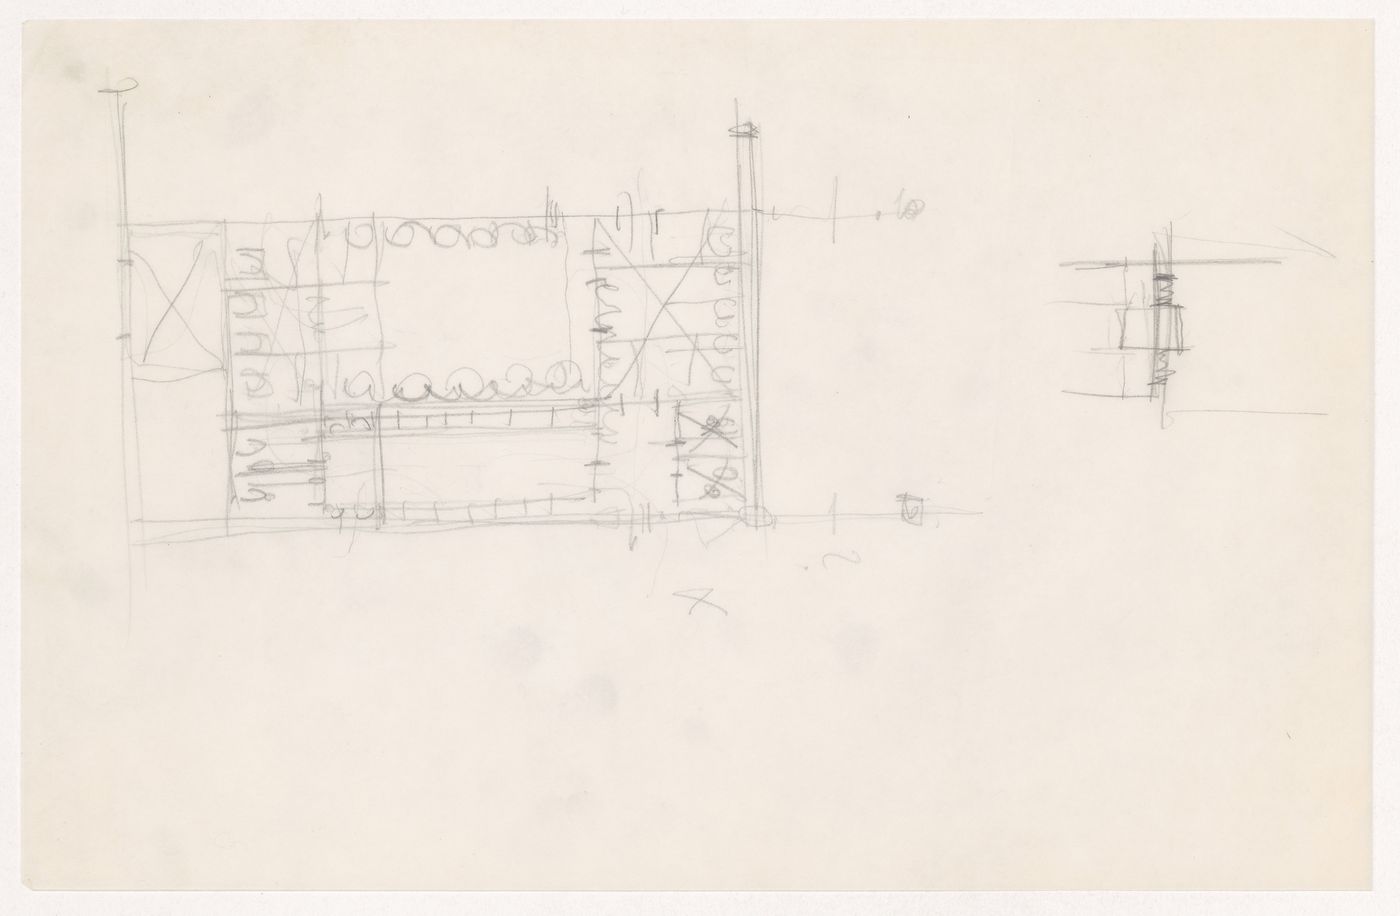 Partial sketch plans for the Metallurgy Building, Illinois Institute of Technology, Chicago, with an unidentified sketch